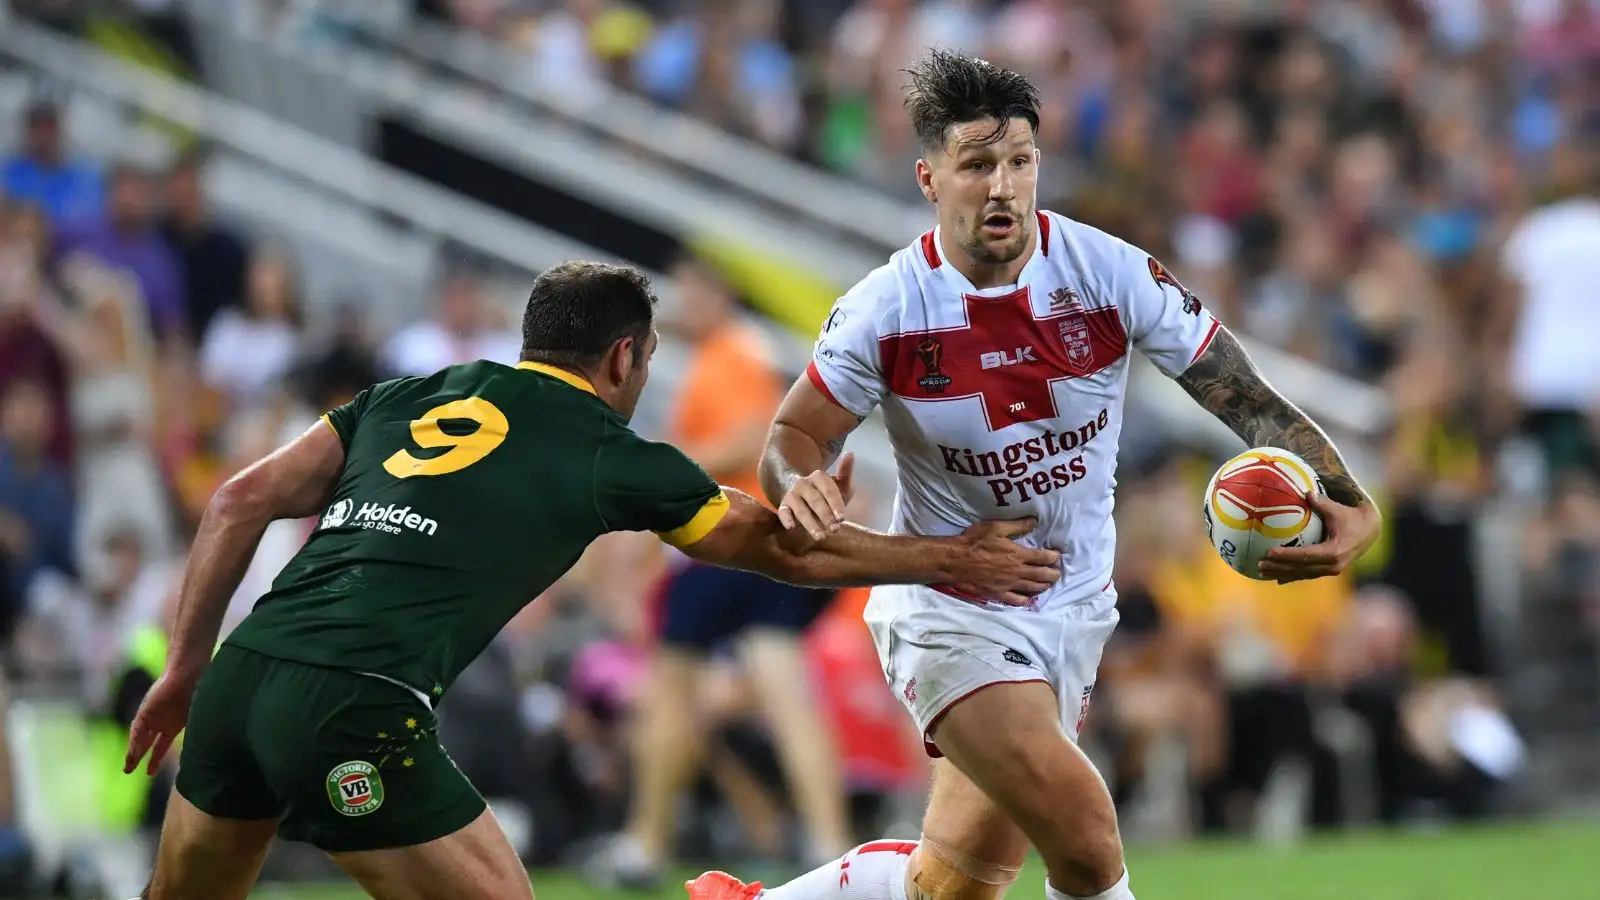 Gareth Widdop: Former NRL champion announces retirement – ‘I have given every bit of my heart and soul into the game’